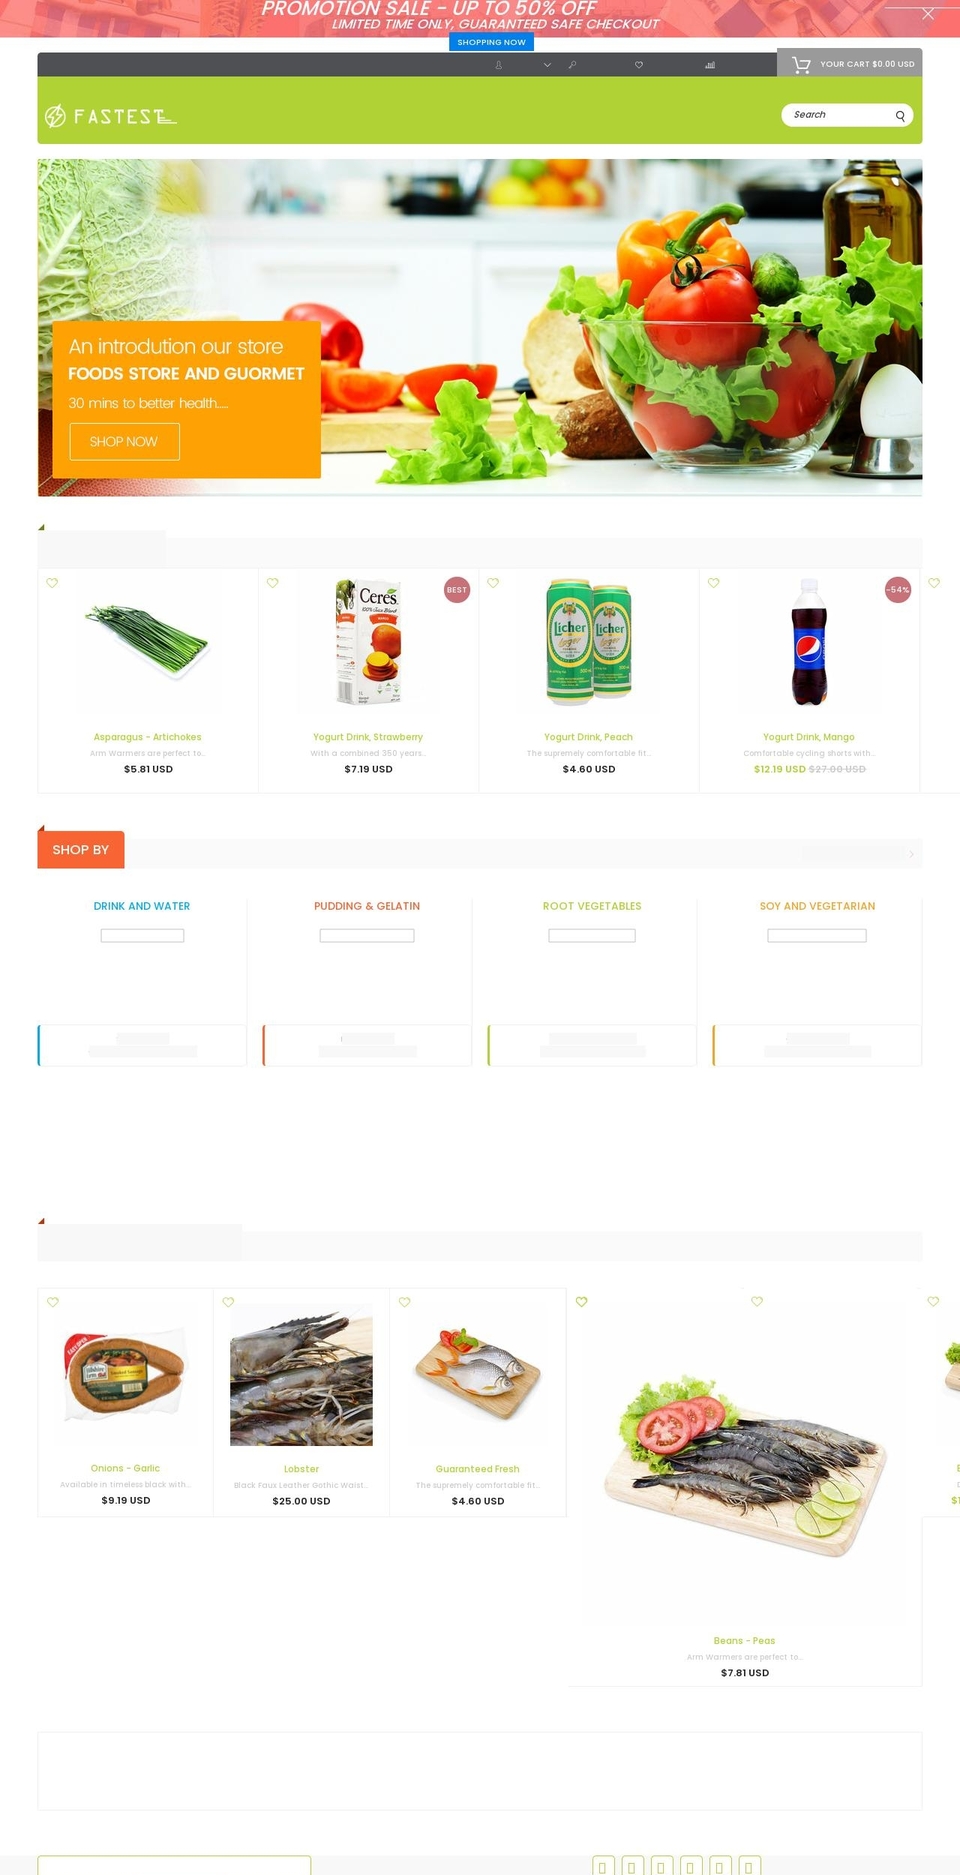 FASTEST Shopify theme site example fastest-food-drink.myshopify.com